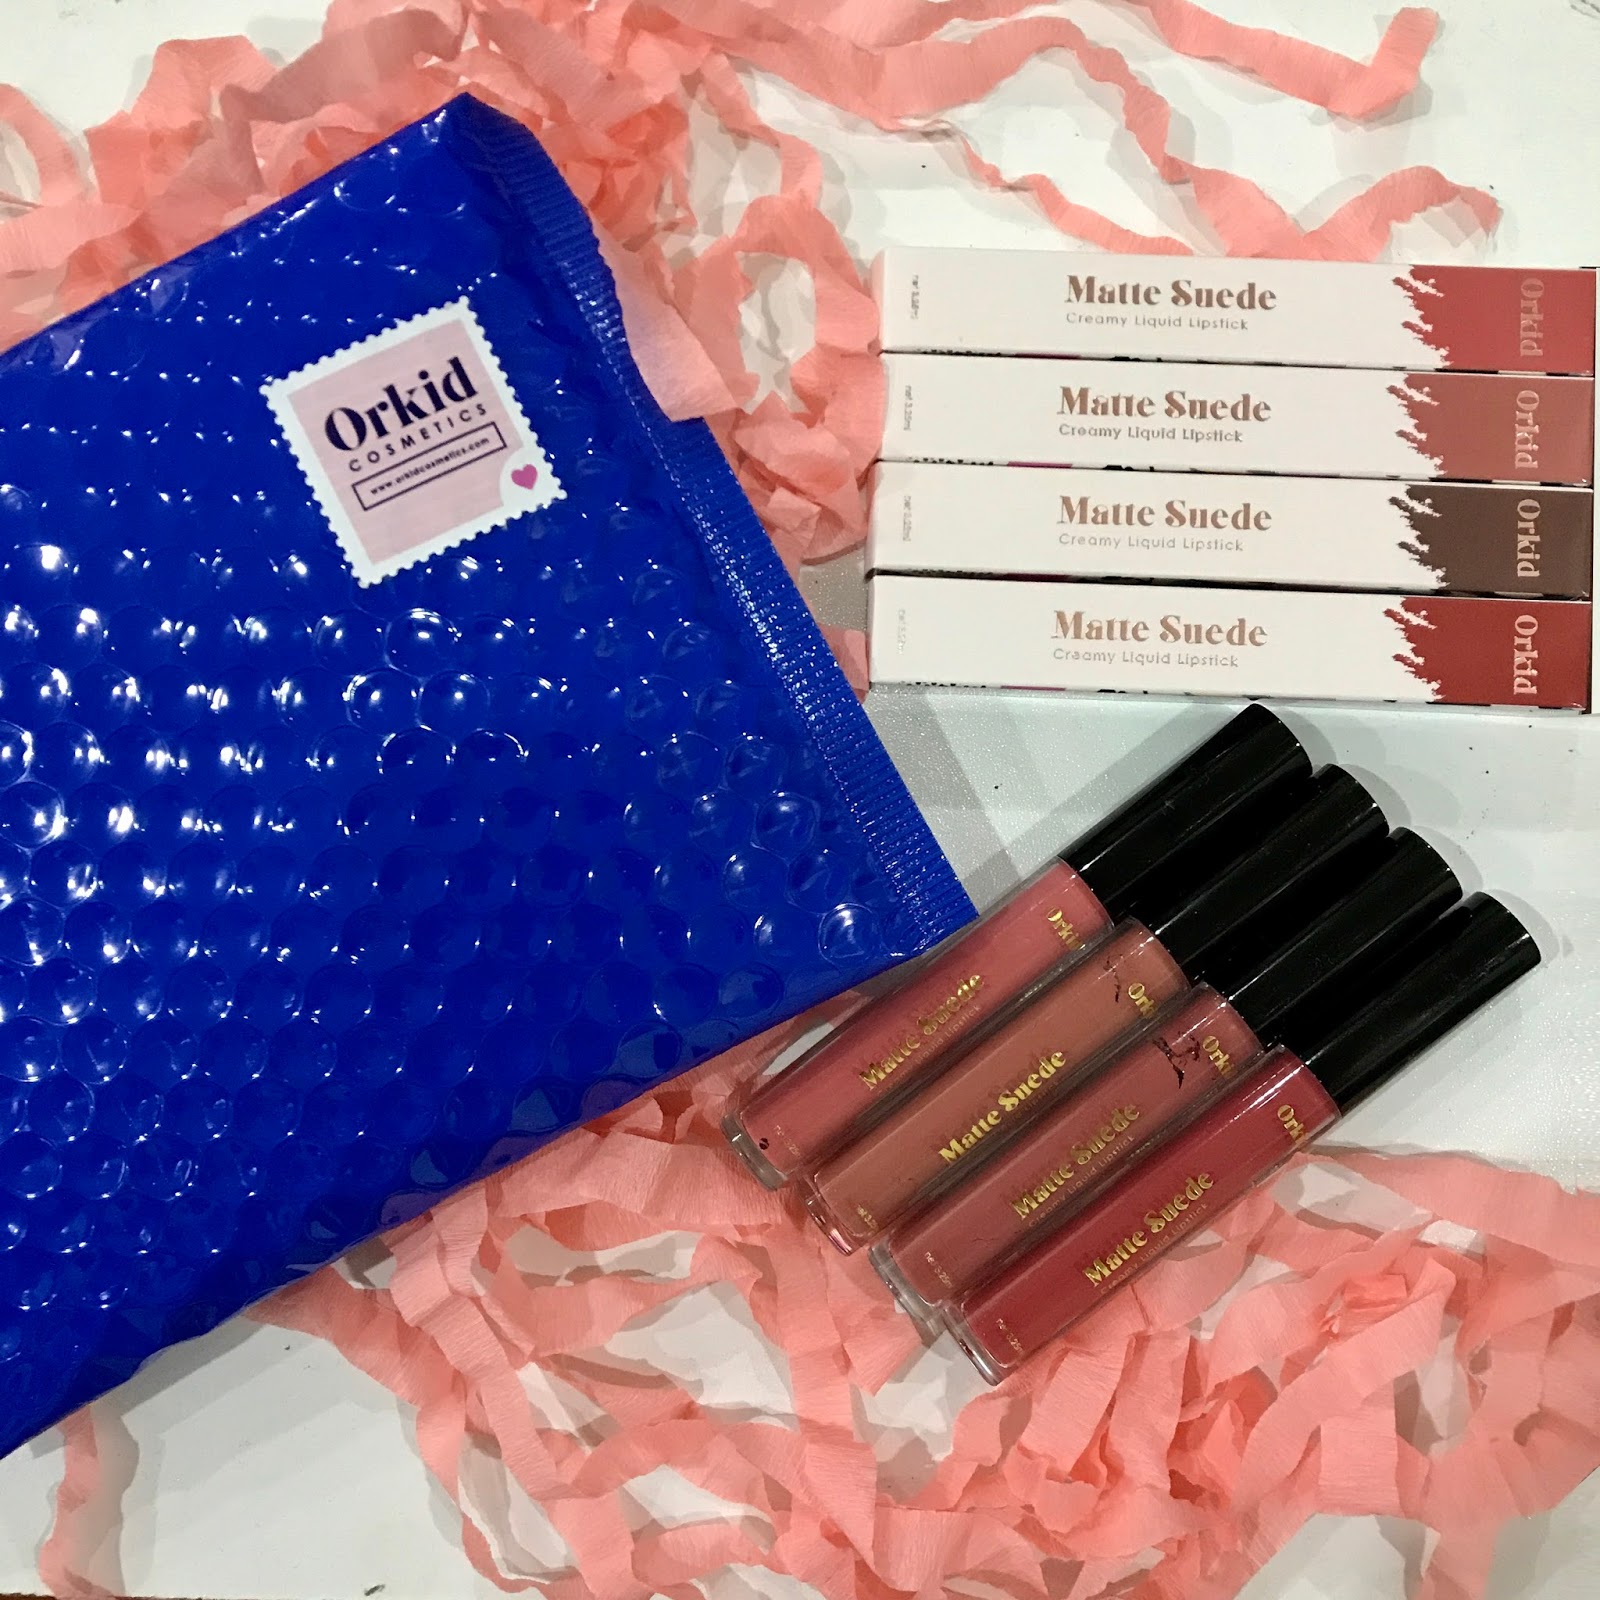 A Local Beauty Product - Orkid Cosmetic 4 type of Matte Suede Creamy Liquid Lipsticks